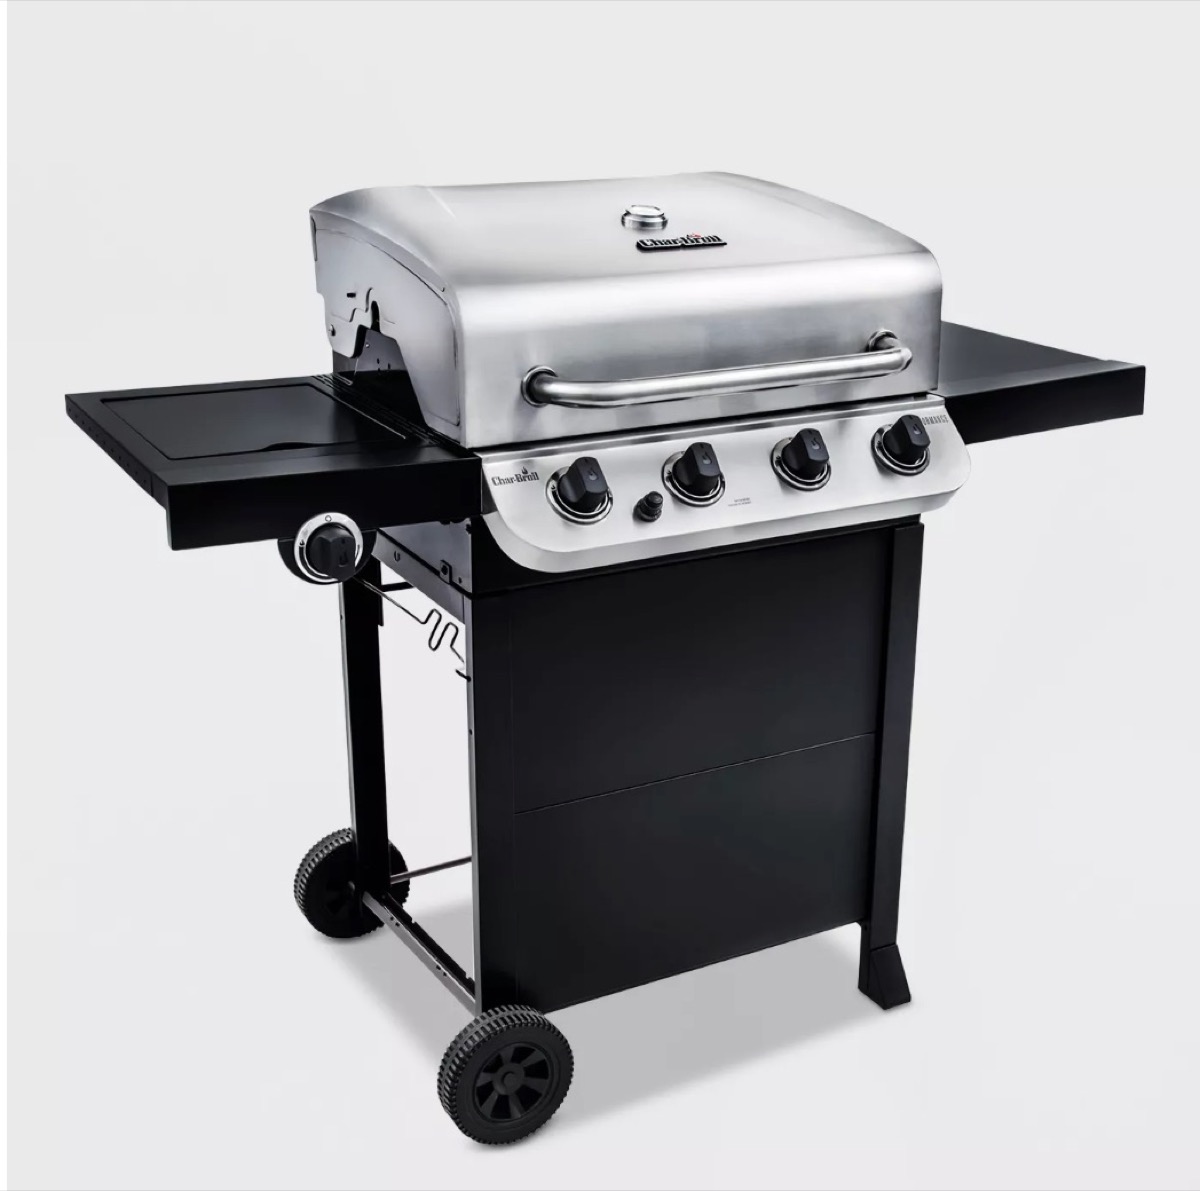 target grill, july 4th sales